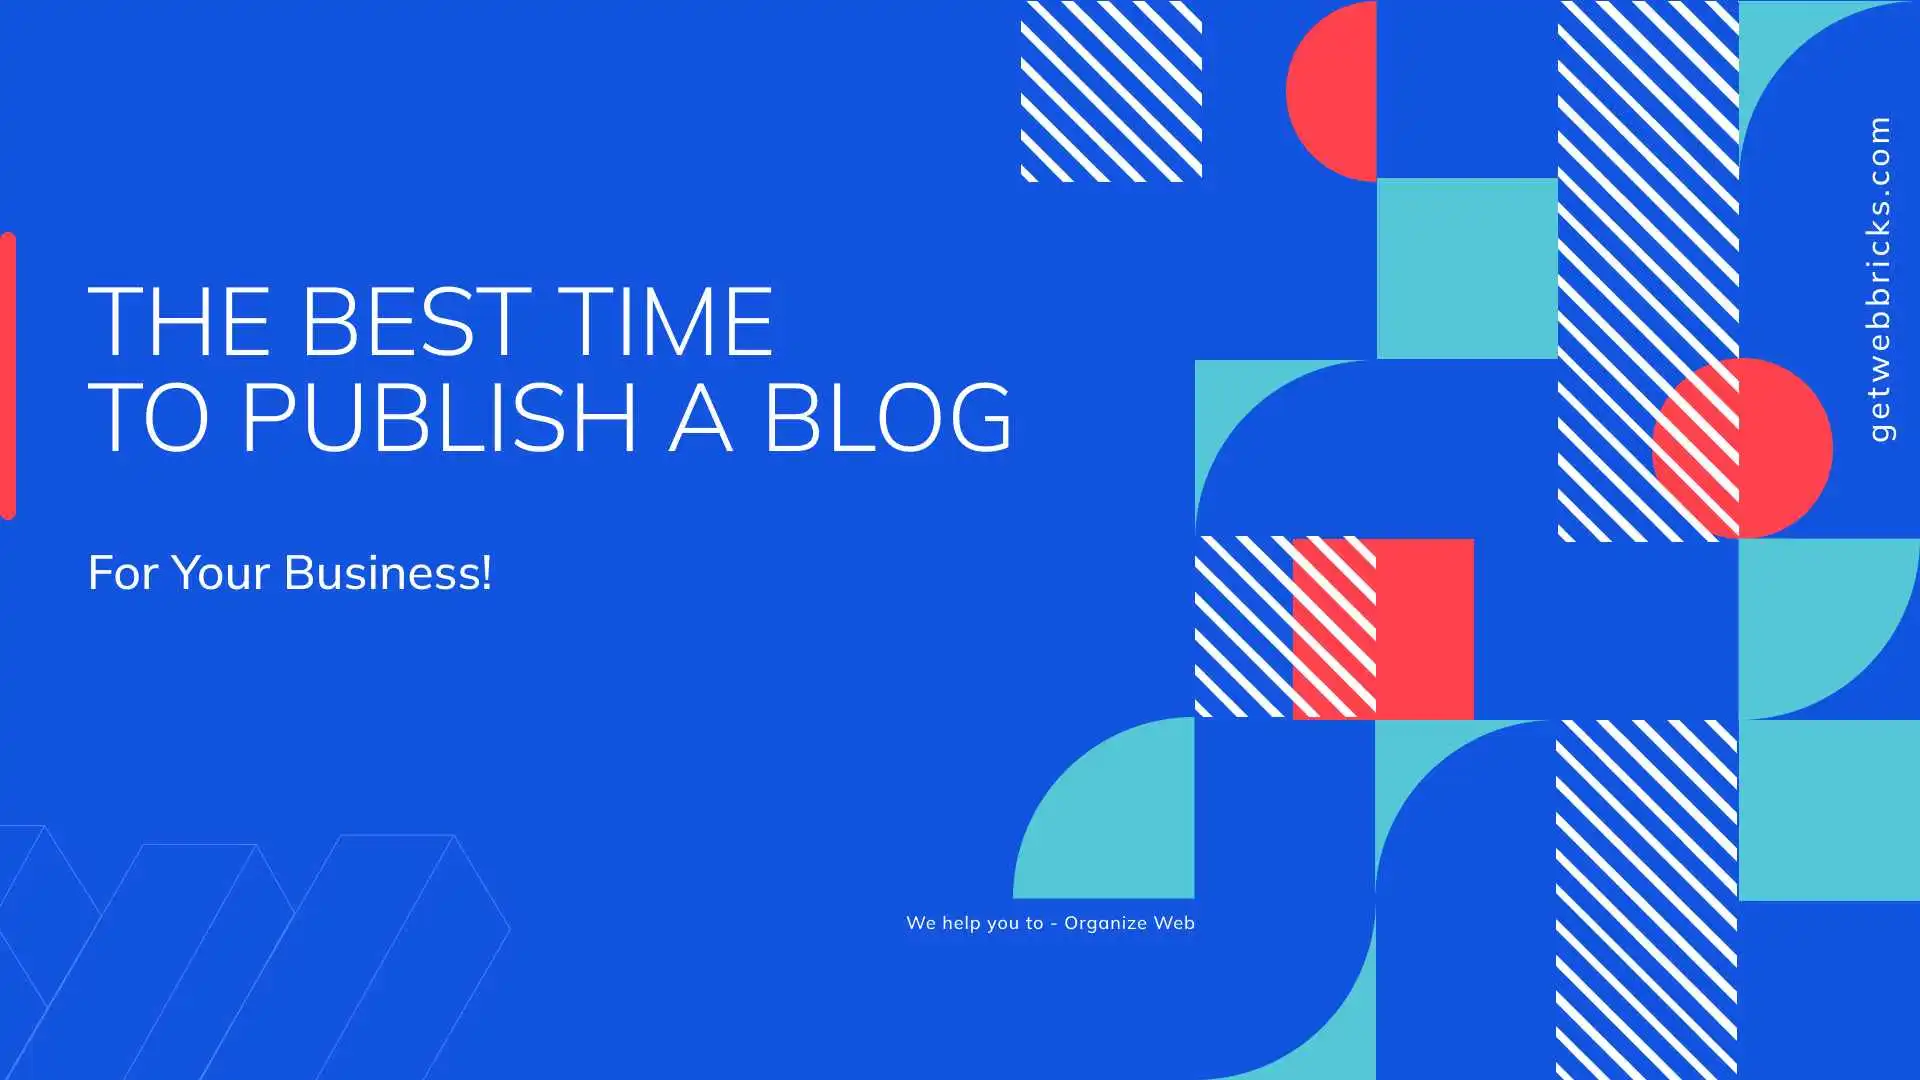 The Best Time to Publish a Blog